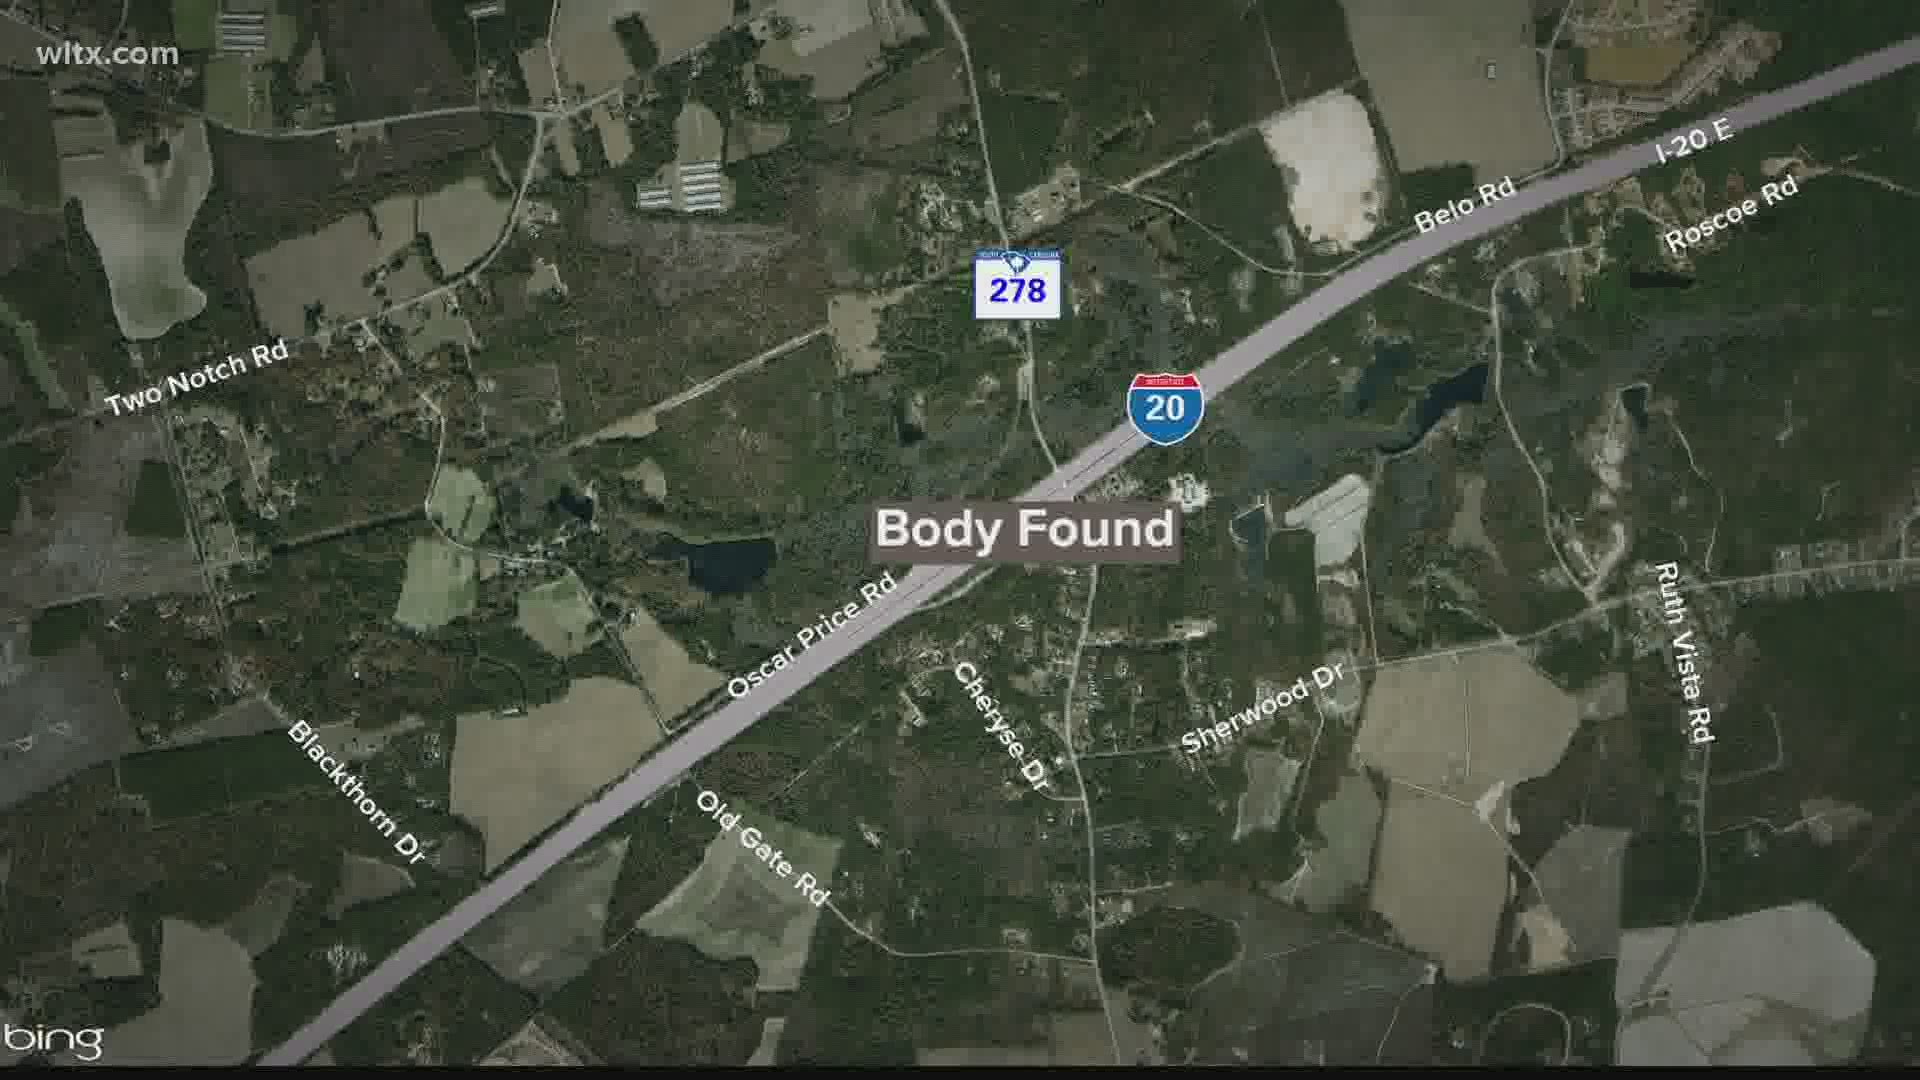 According to Lexington County Sheriff's Department, the body was located at a former rest area off I-20 west.